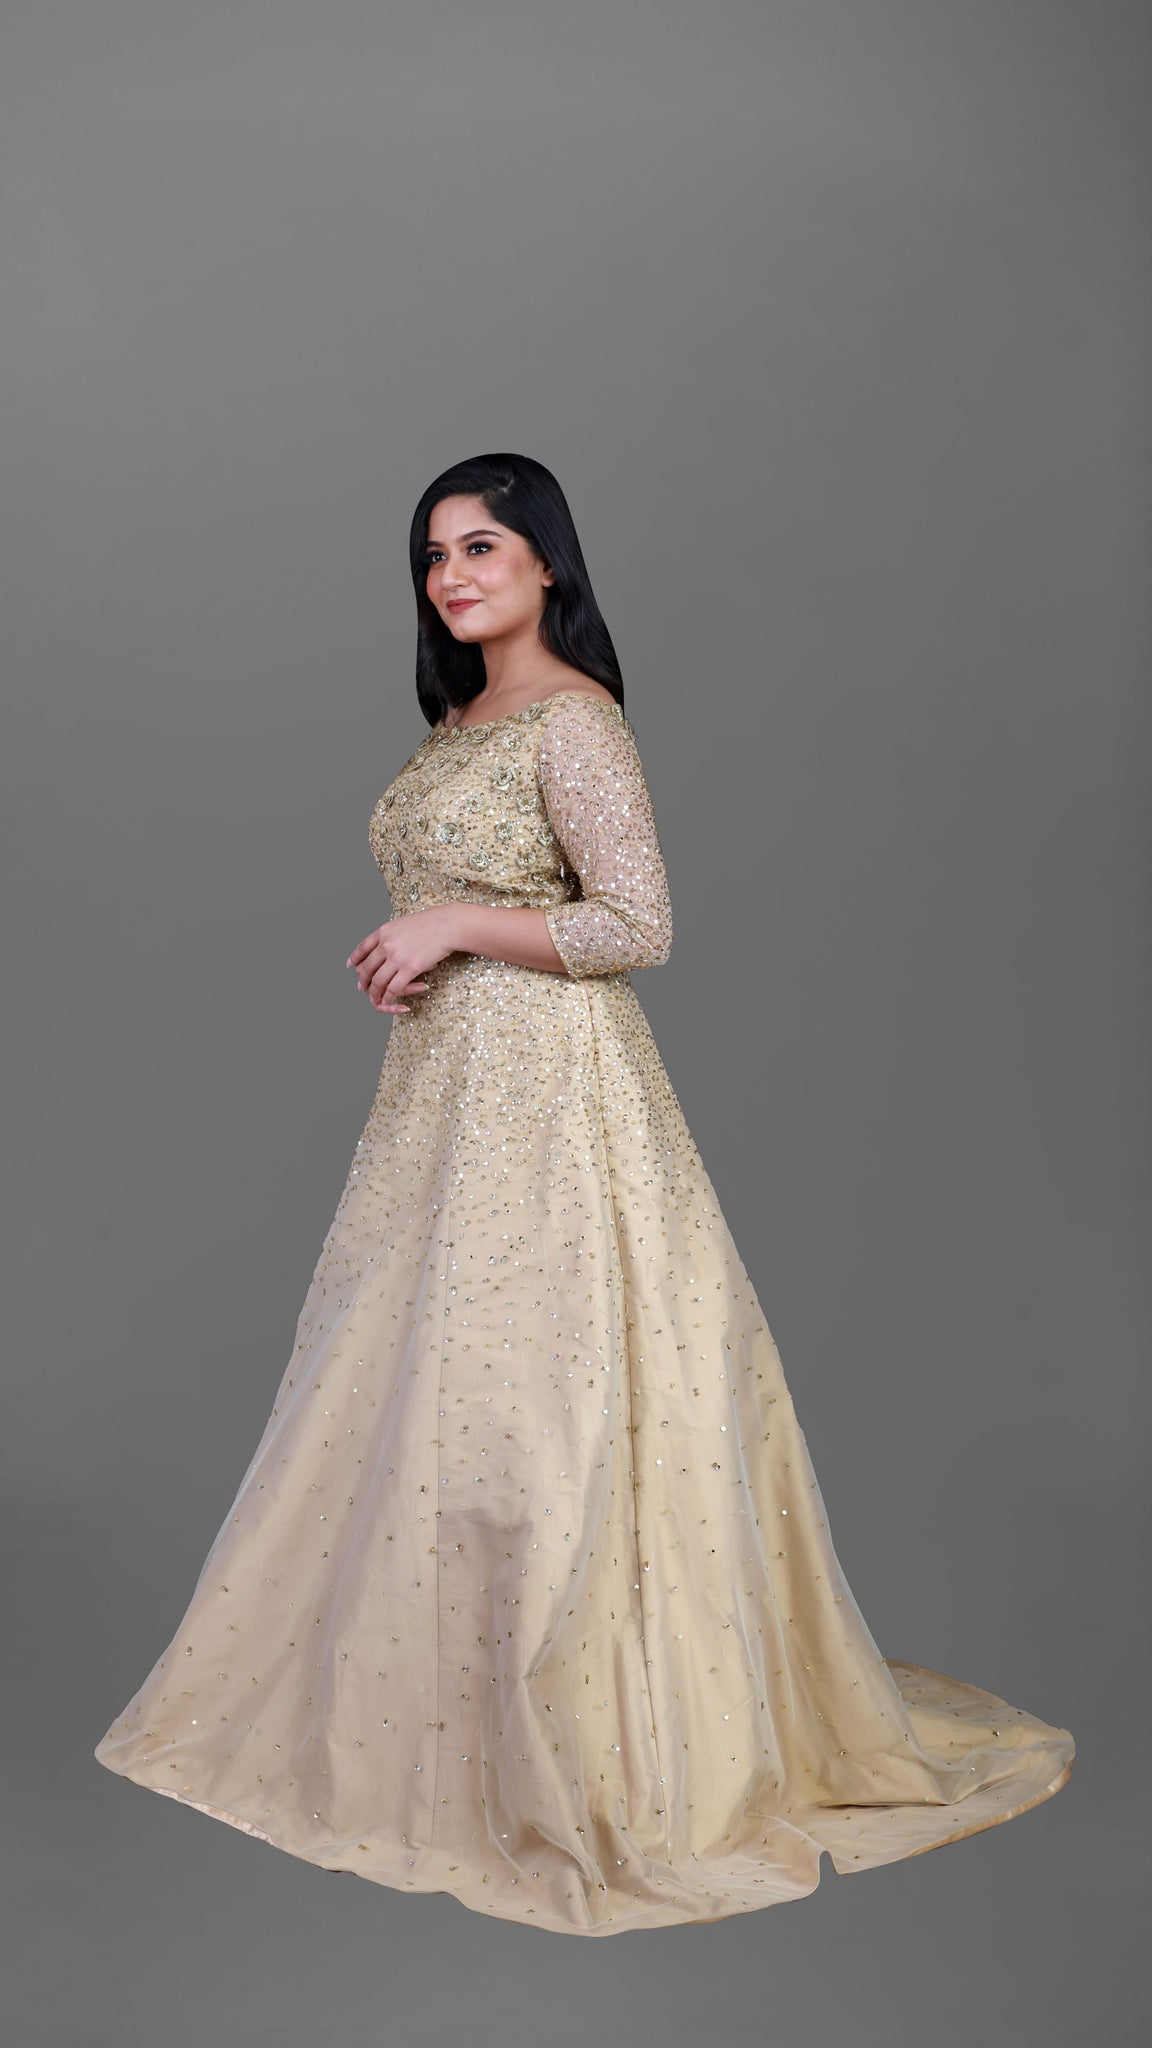 S4U Shivali Gold Gowns 001-007 Series Designer Gown For S4U For Full